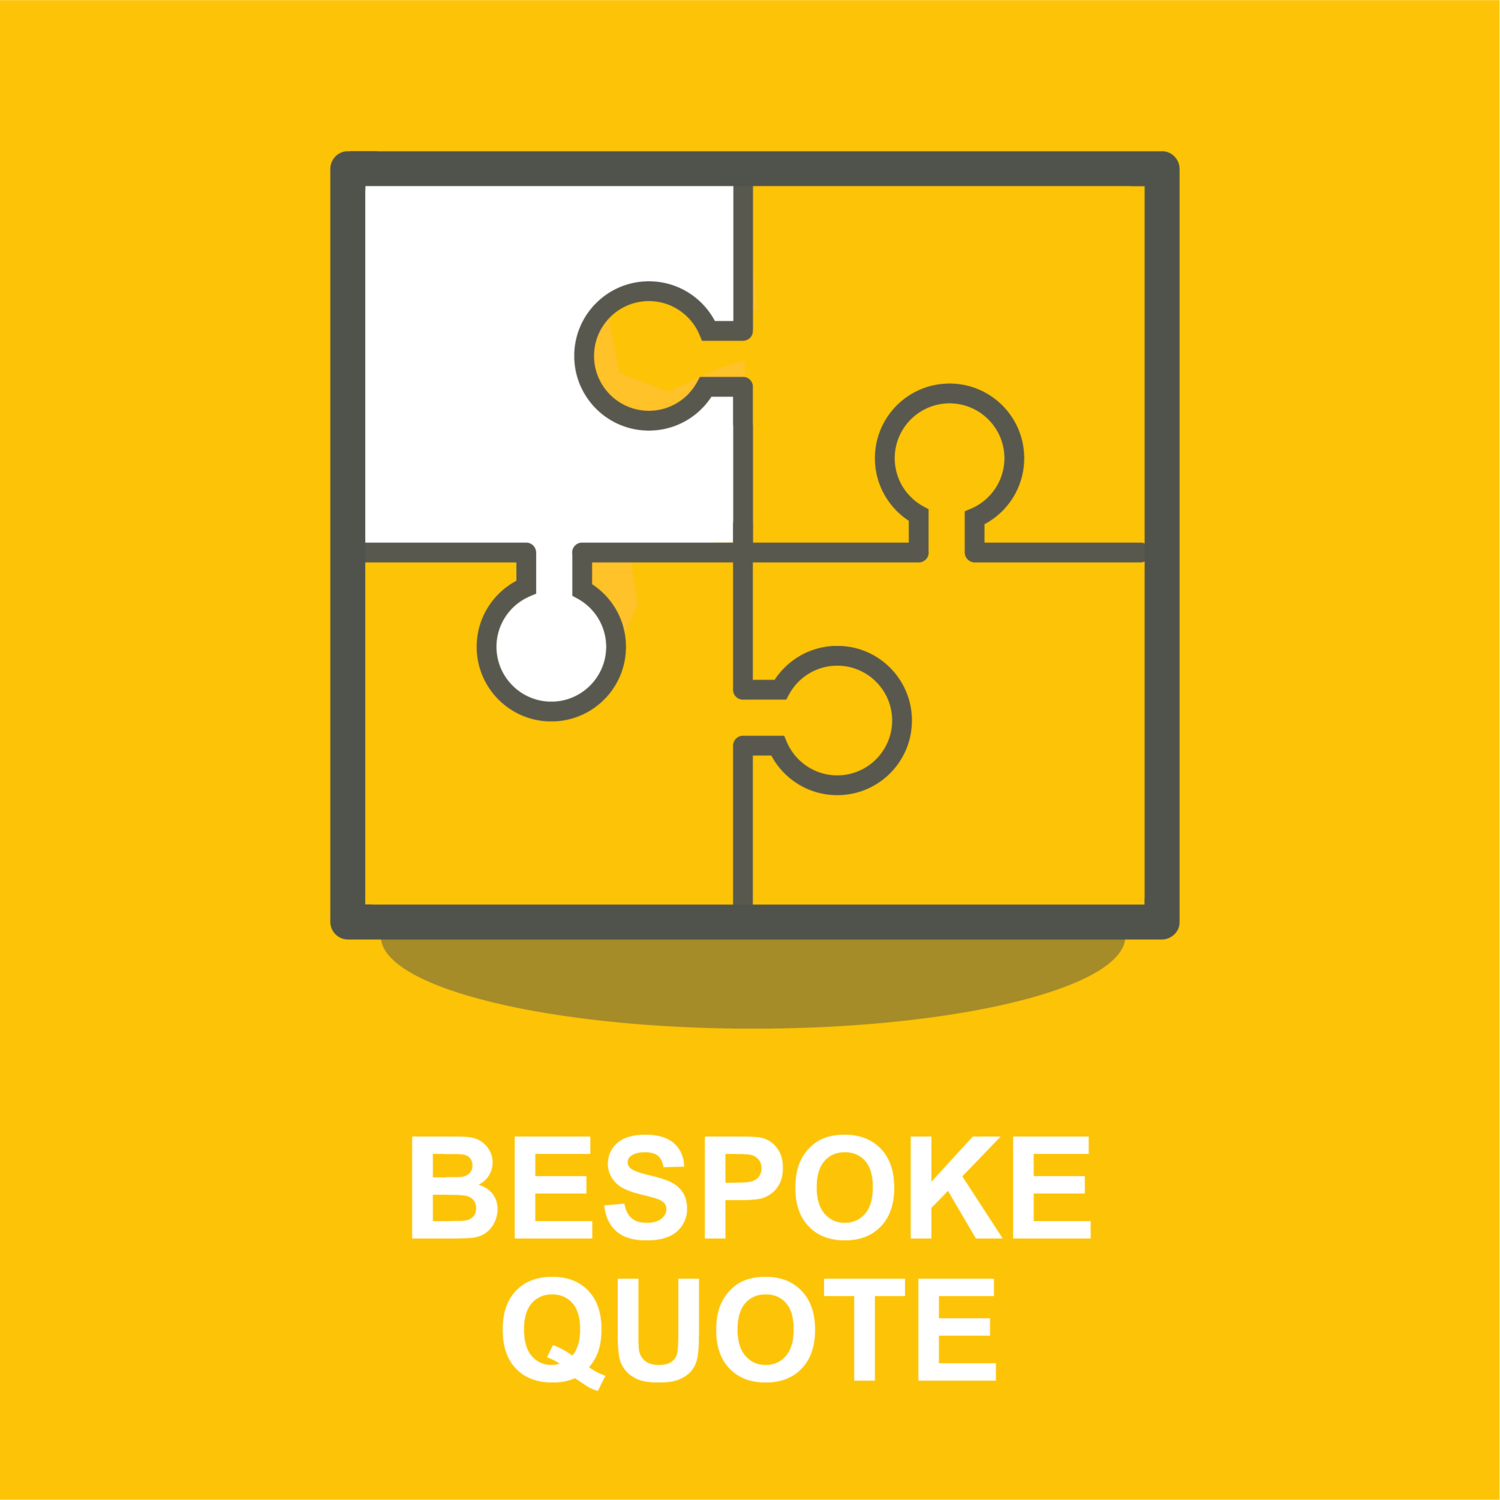 Pay a bespoke quote